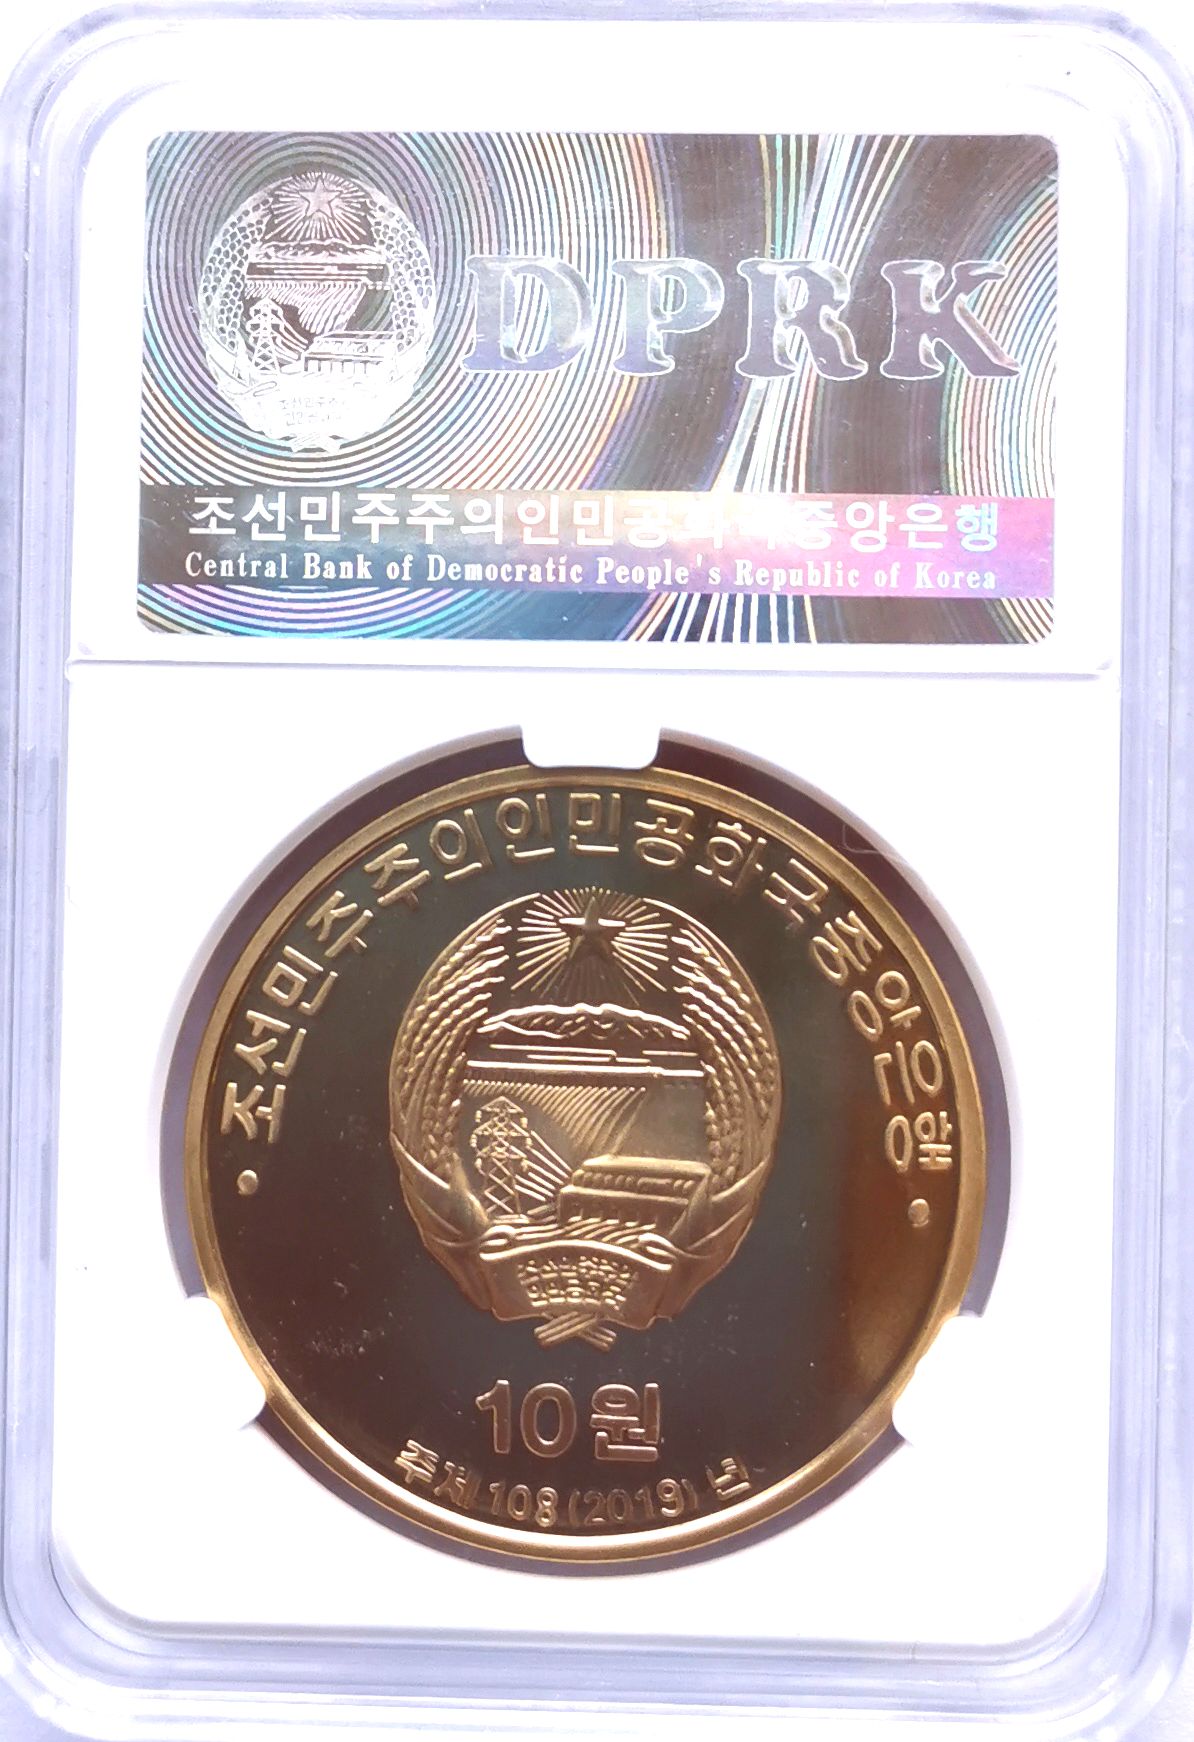 L3388, Visiting Korea Proof Coin Series "Eagle", Brass 2019 - Click Image to Close